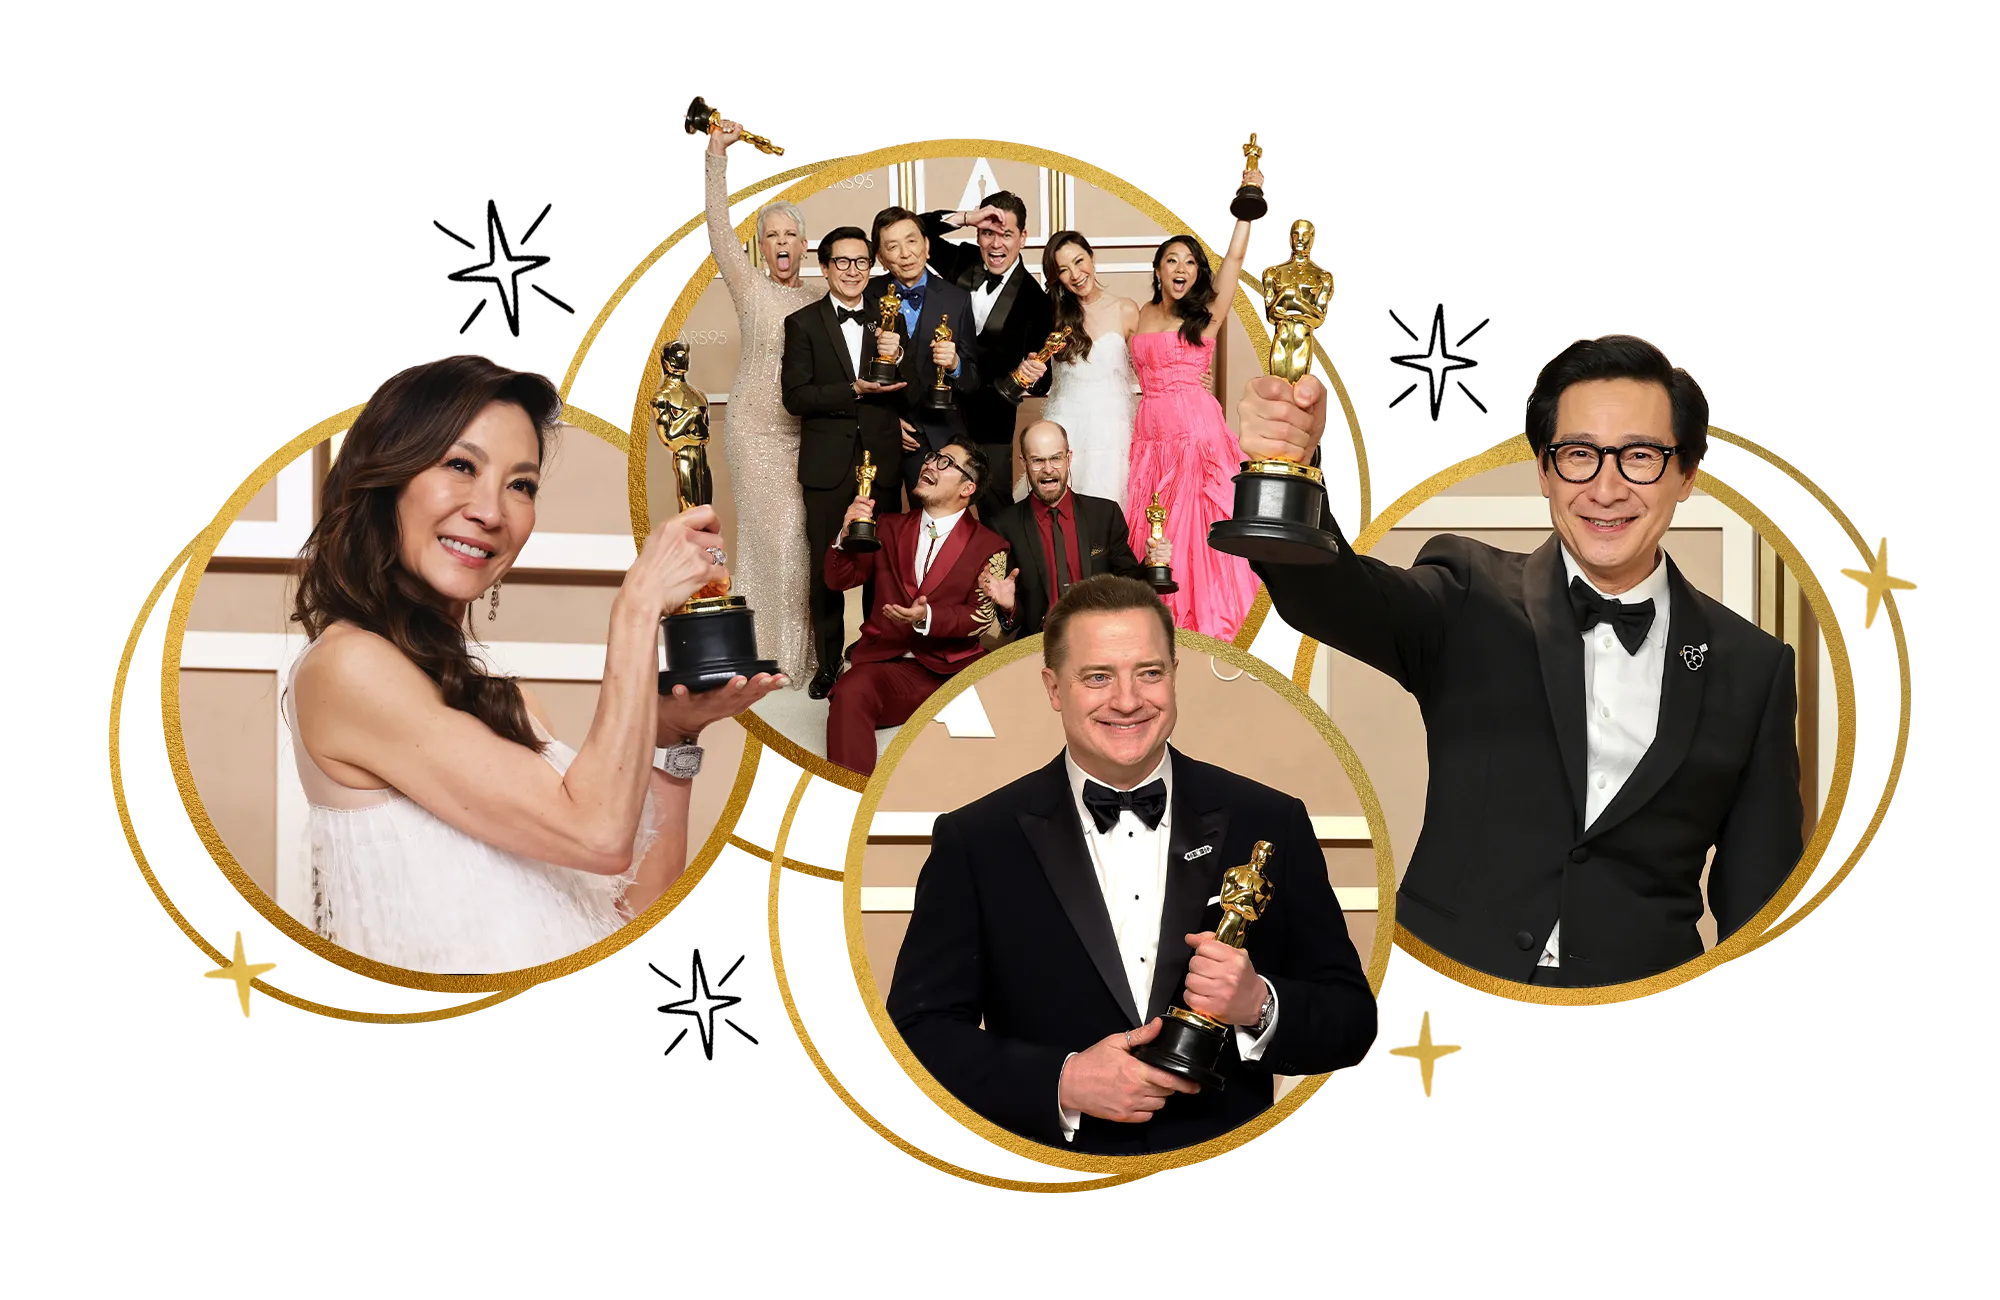 Four winners of the night were Michelle Yeoh, Everything Everywhere all at Once, Ke Huy Quan, and Brendan Fraser.